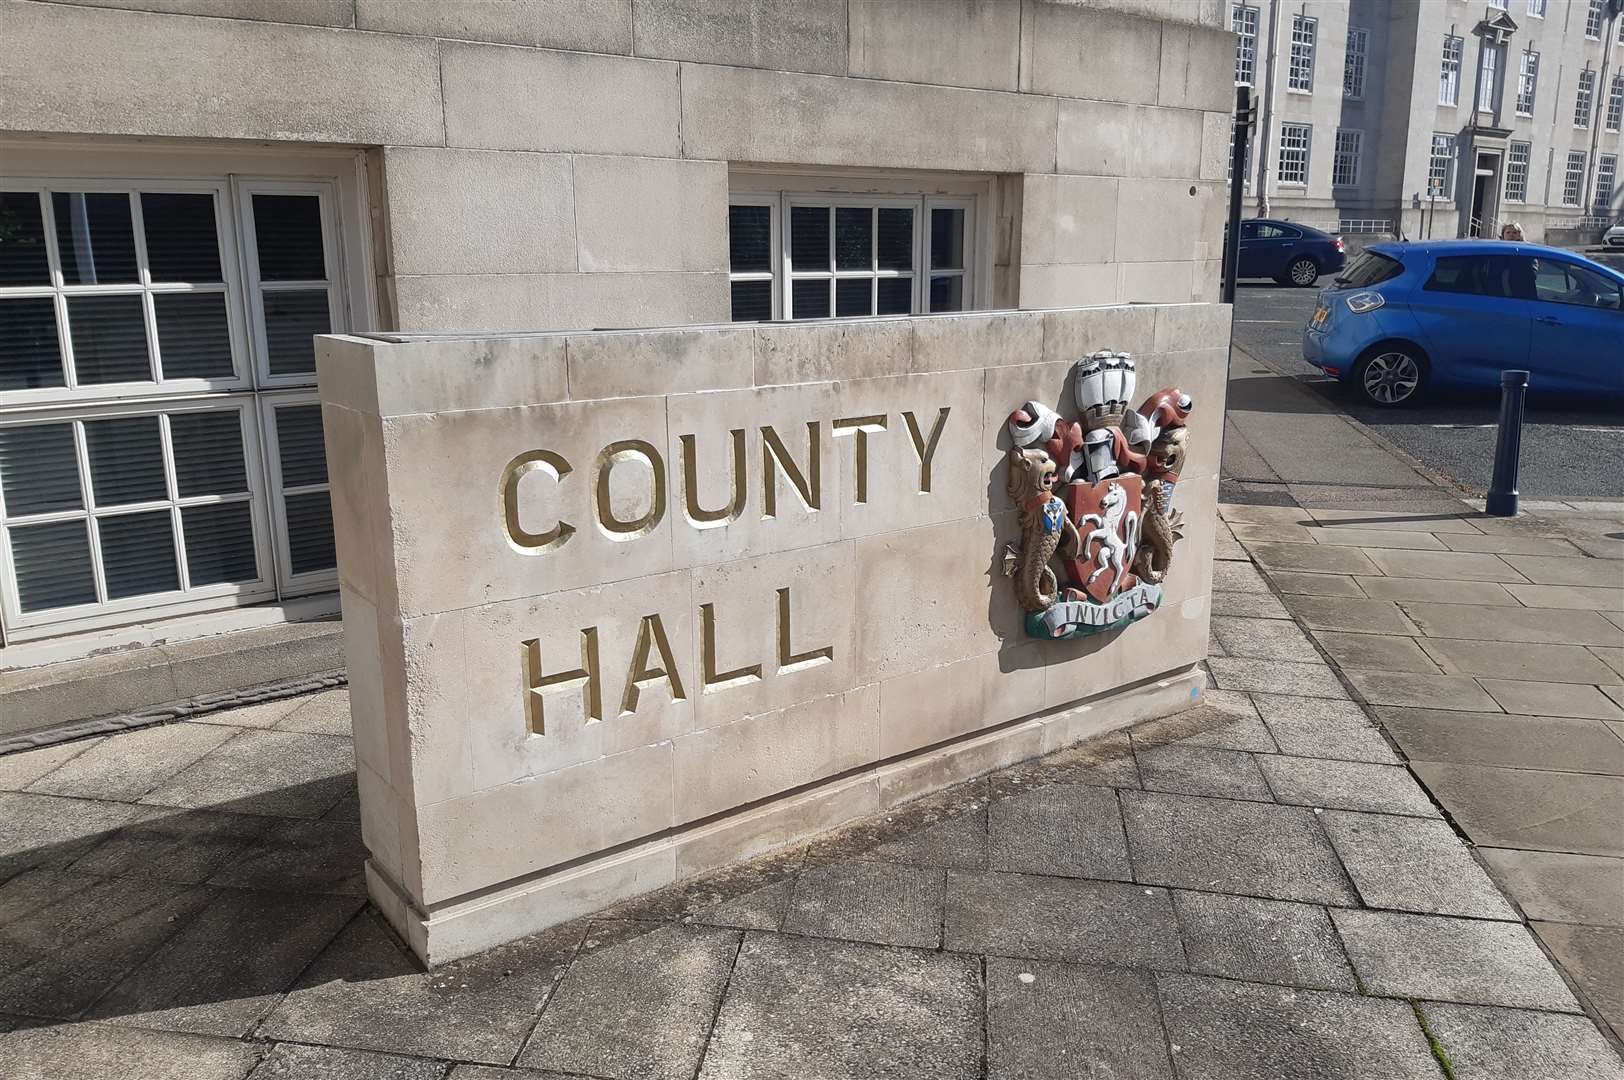 Kent County Council is based at County Hall in Maidstone